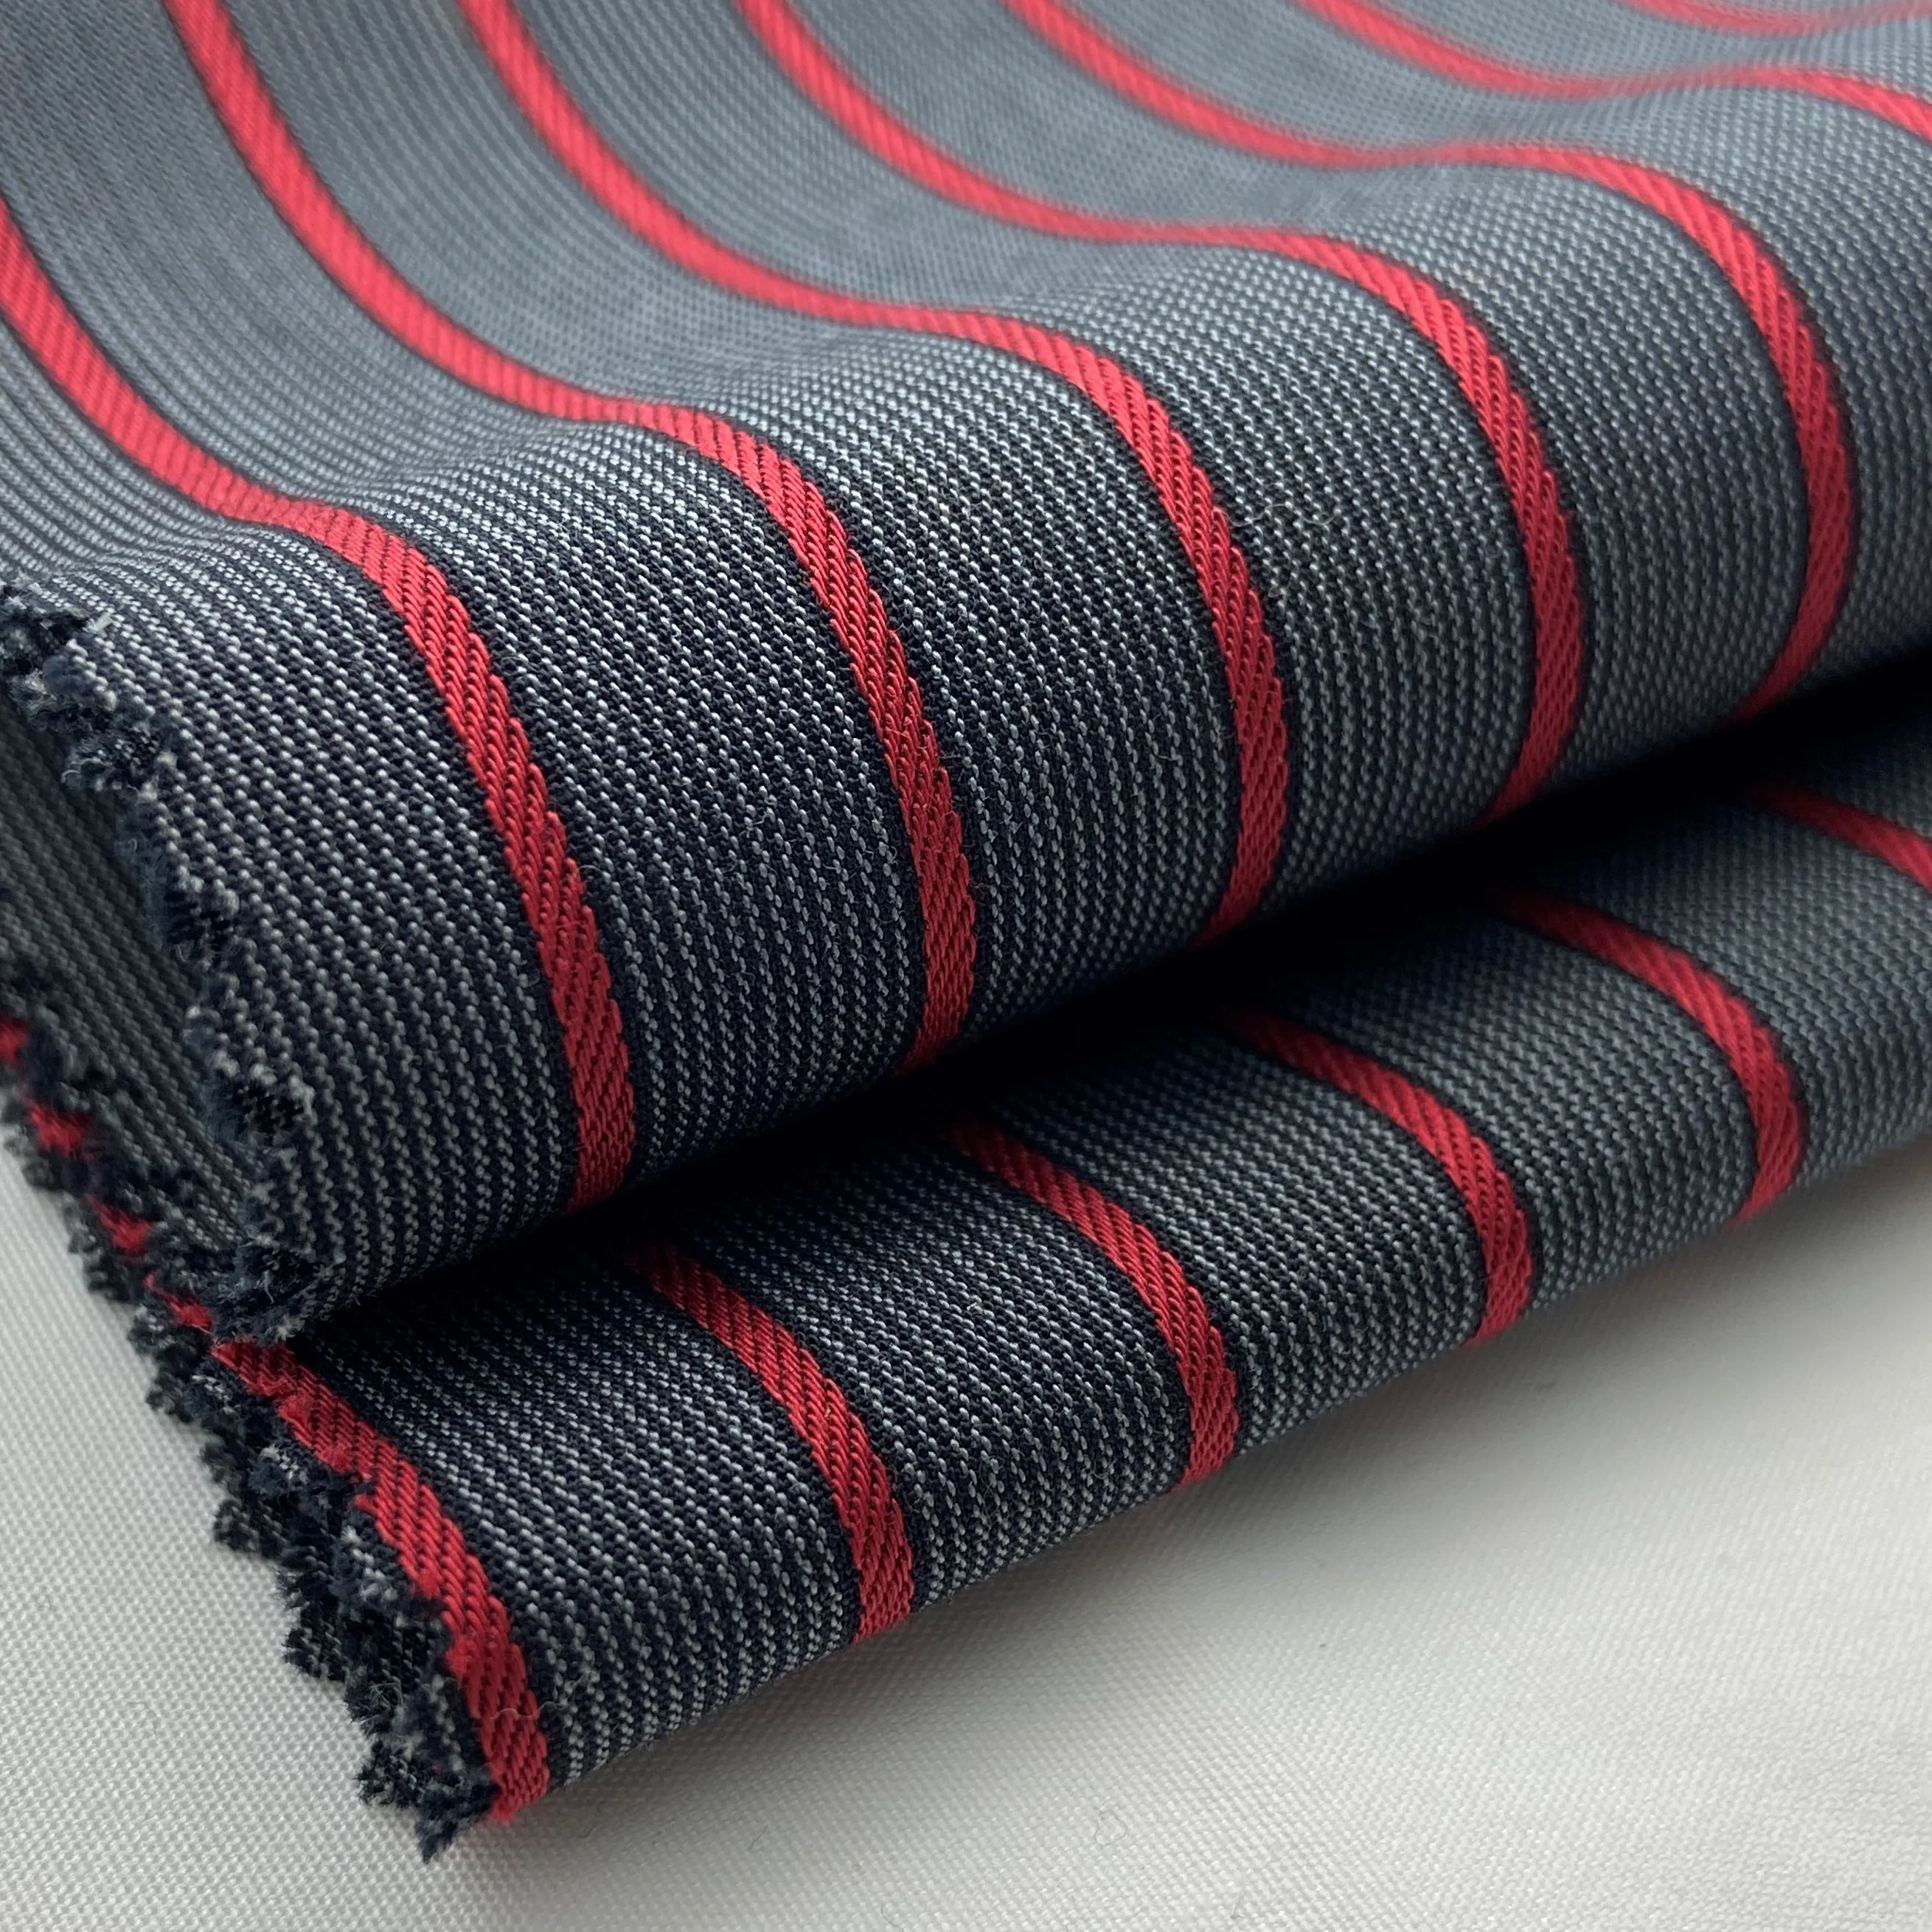 2021 New Top Quality Organic 100% Pure Cotton Dobby Stripe Soft Finish Fabric For Shirt